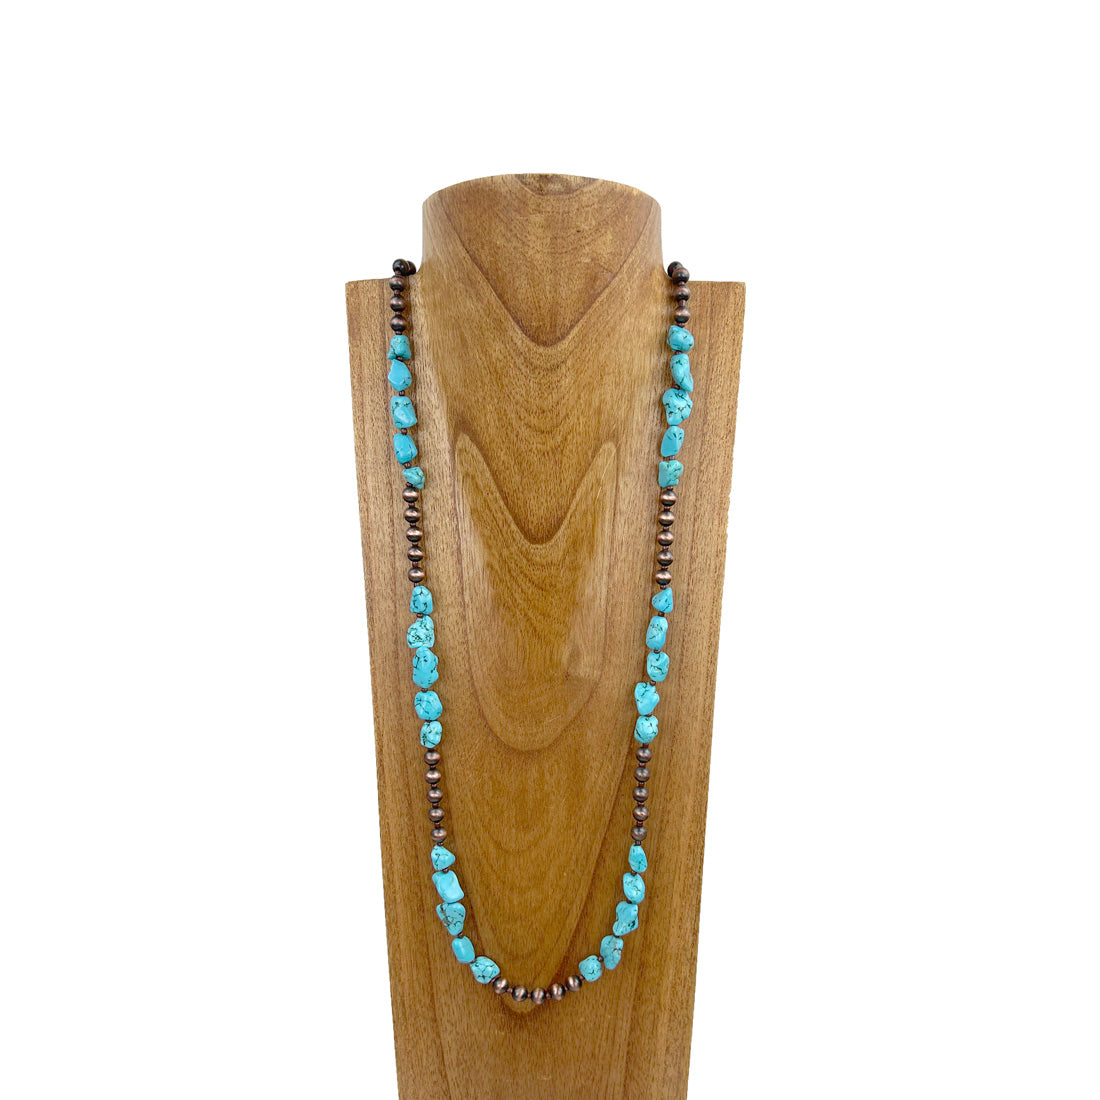 NKZ230930-07                40 inches blue turquoise stone with copper Navajo pearl beads Necklace